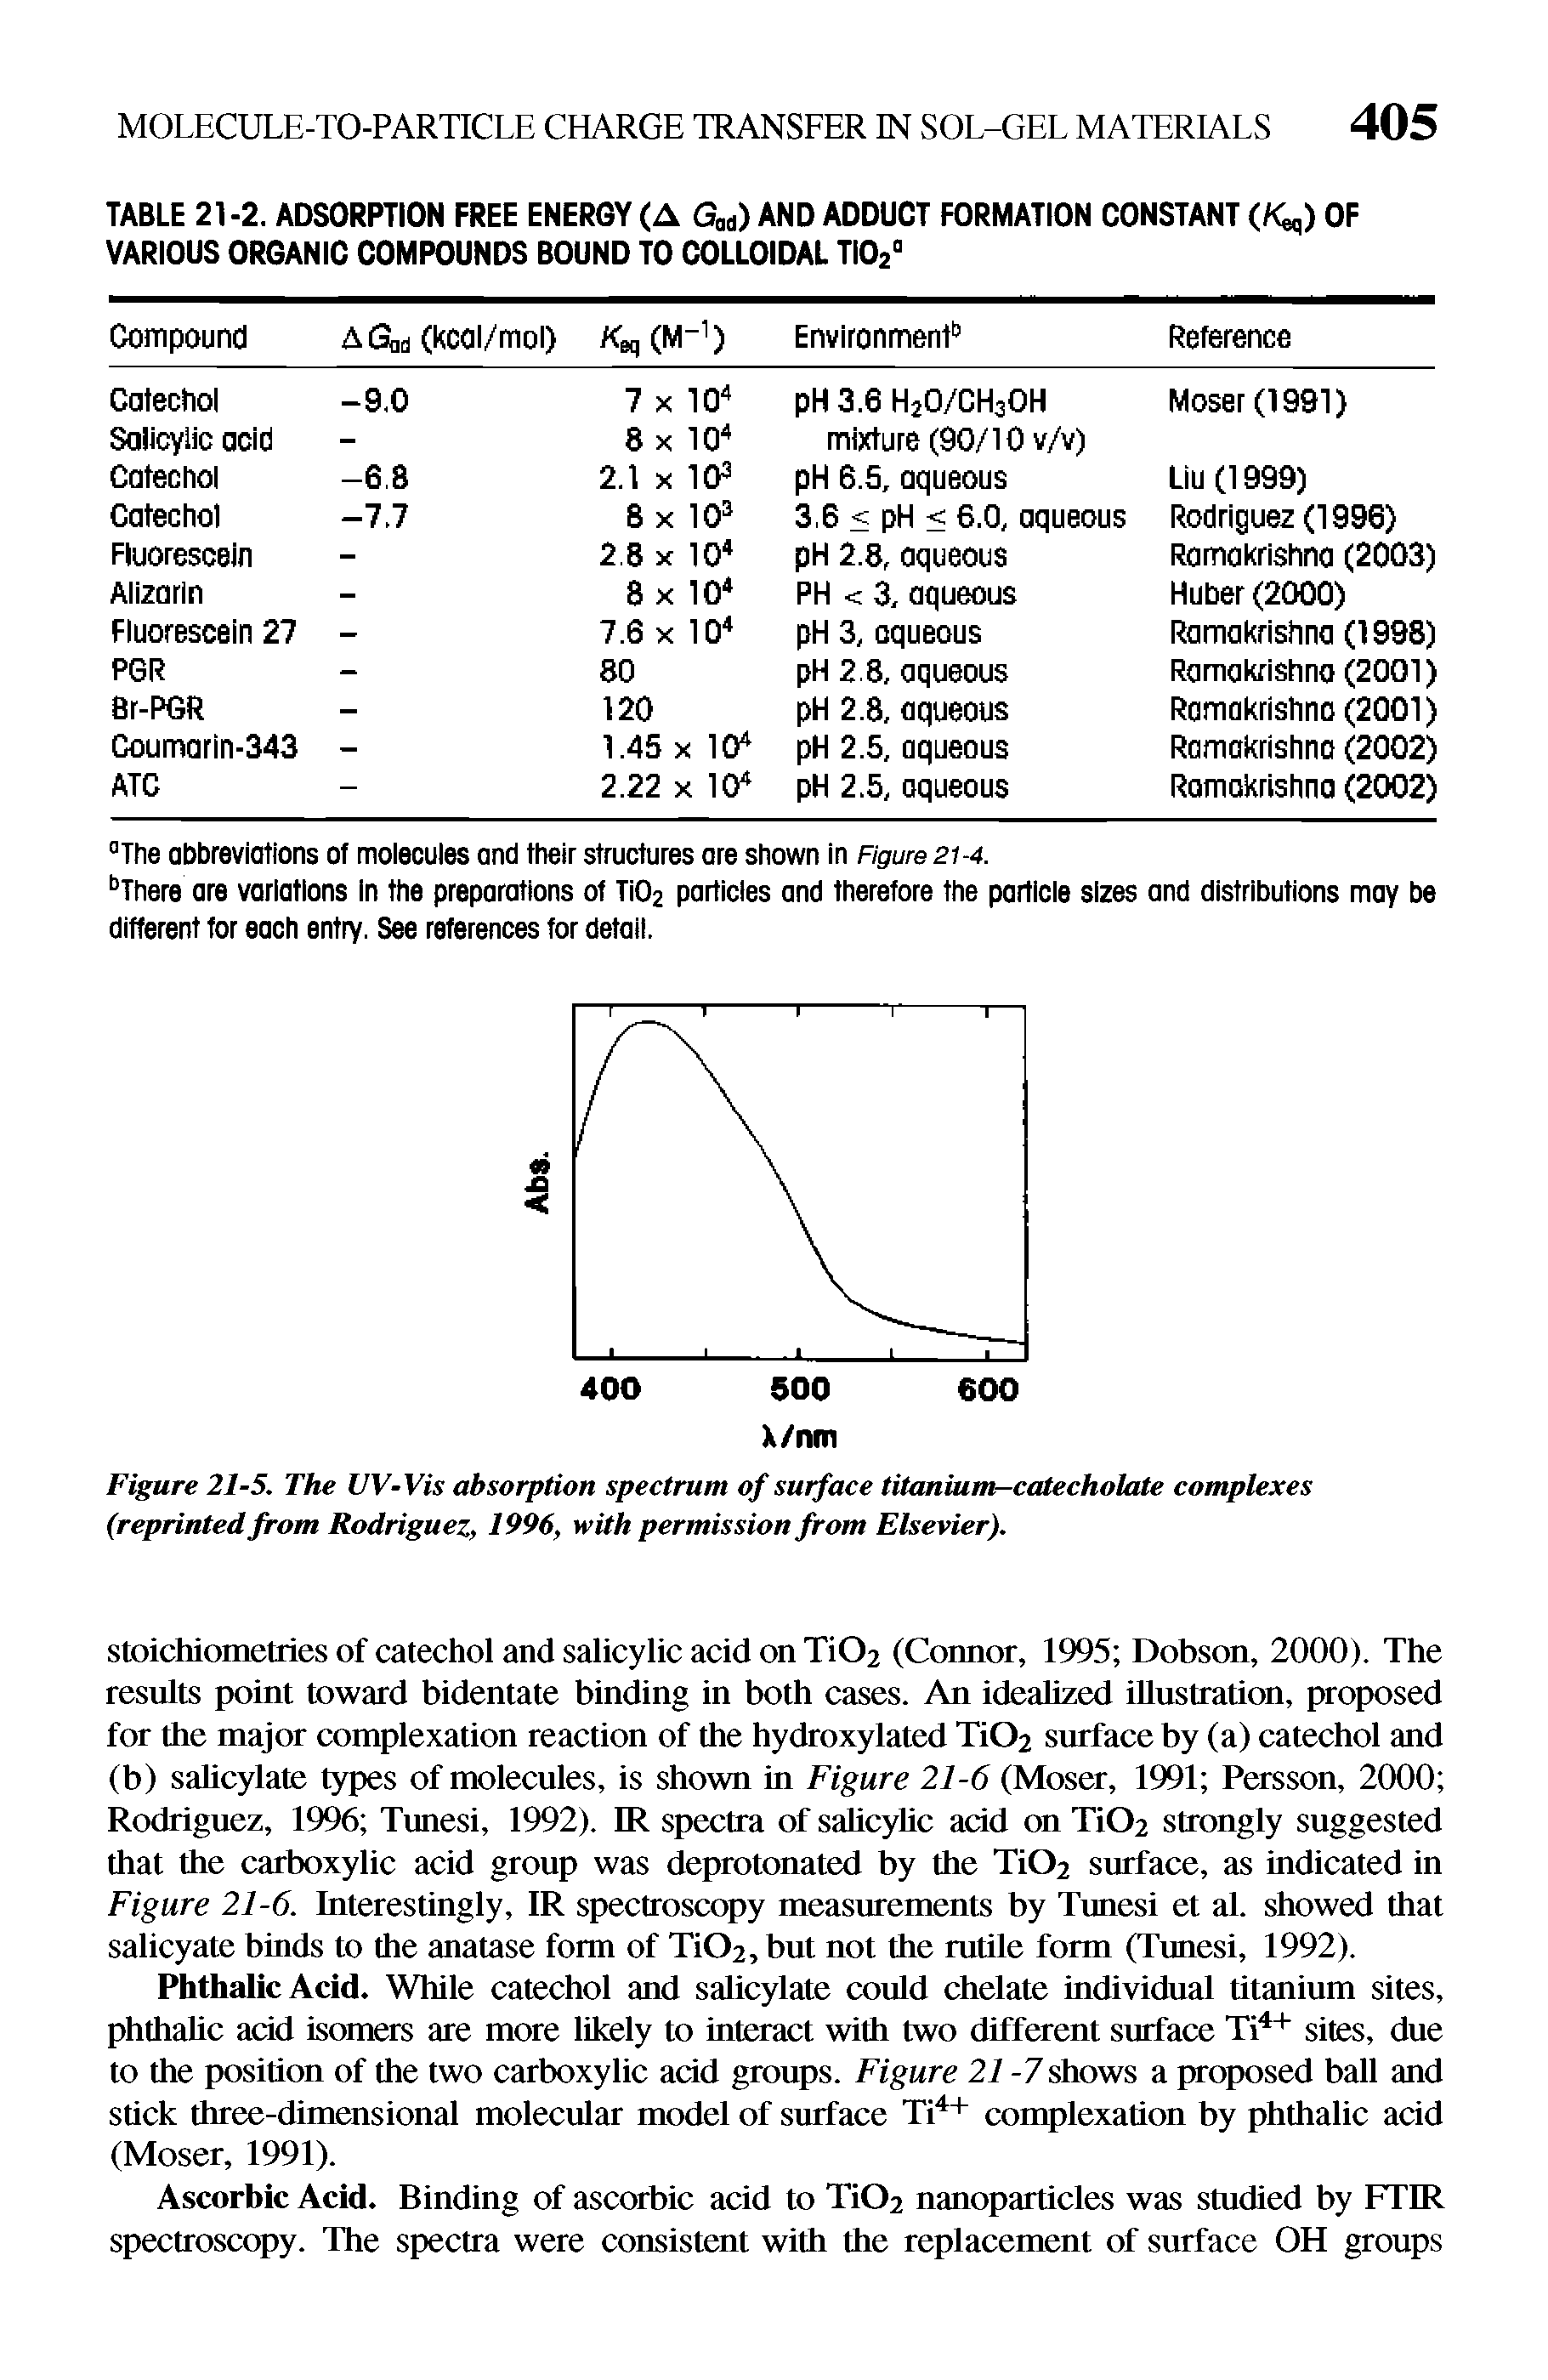 Figure 21-5. The UV-Vis absorption spectrum of surface titanium-catecholate complexes (reprinted from Rodriguez, 1996, with permission from Elsevier).